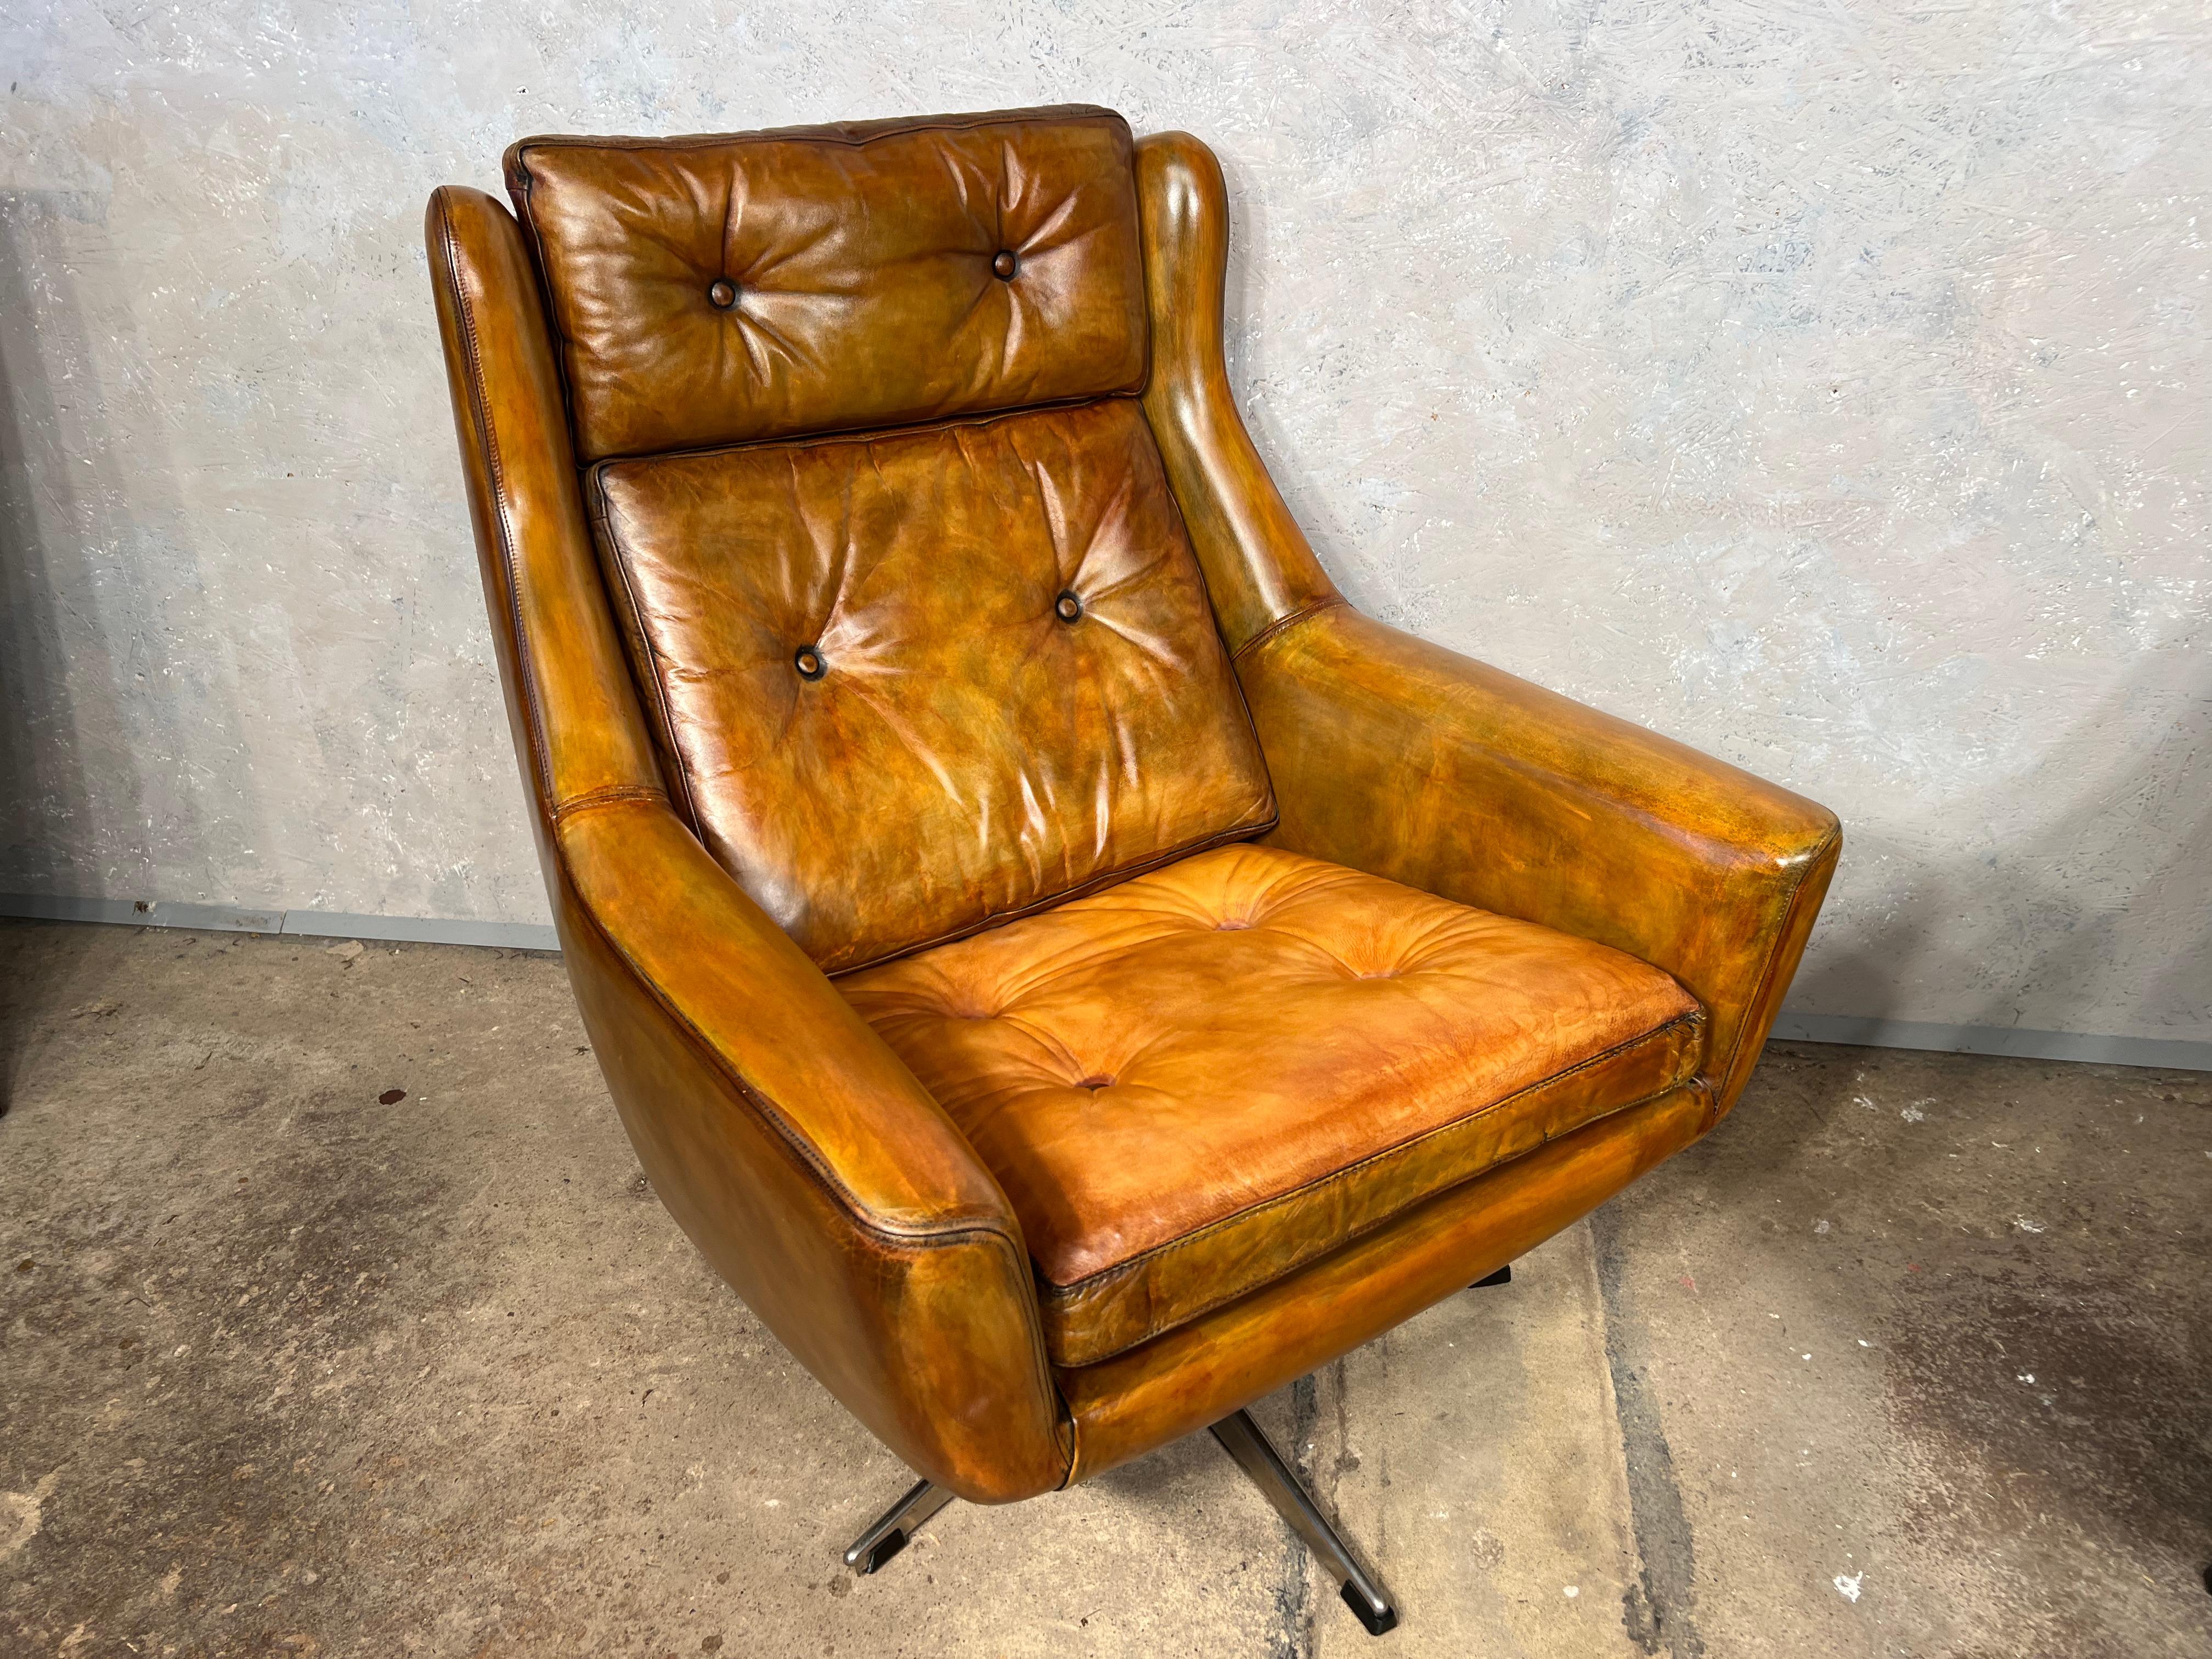 A stunning pair of Danish Swivel Chairs , great design, very comfortable to sit in, a most beautiful tan colour with a great finish.

In great condition.

Viewings welcome at our showroom in Lewes, East Sussex.